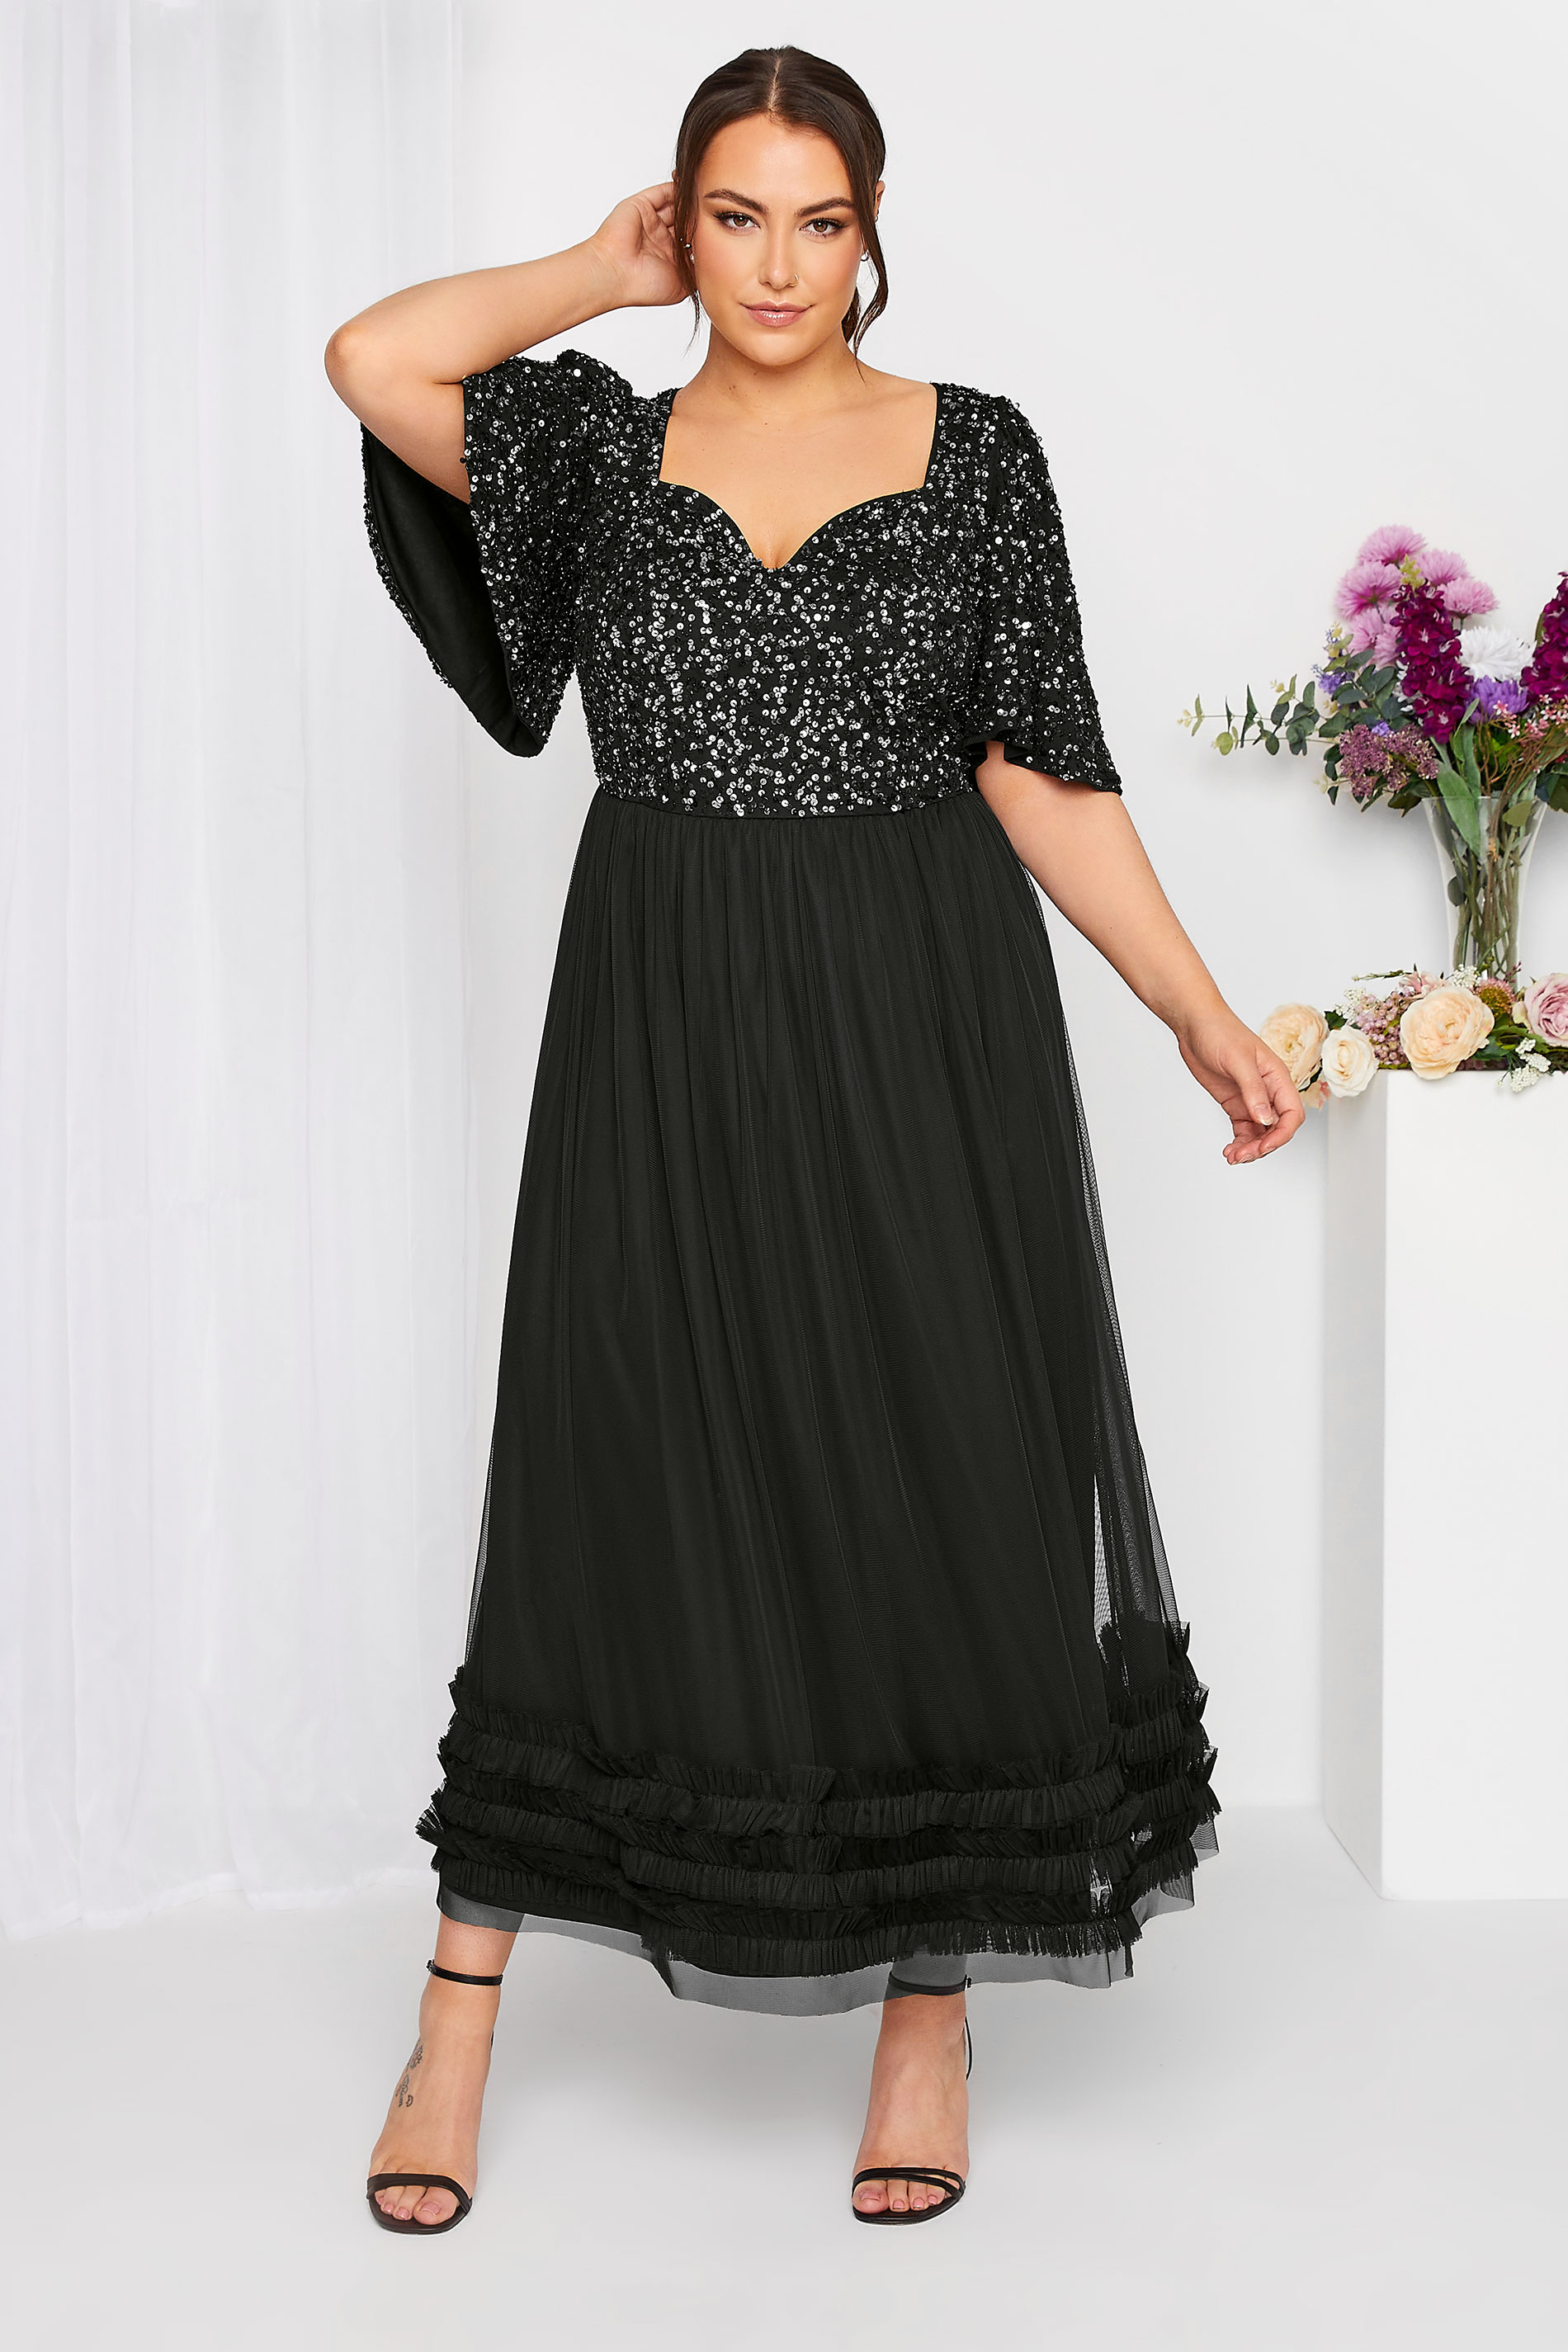 LUXE Plus Size Curve Black Sequin Sweetheart Ruffle Maxi Dress | Yours Clothing  1